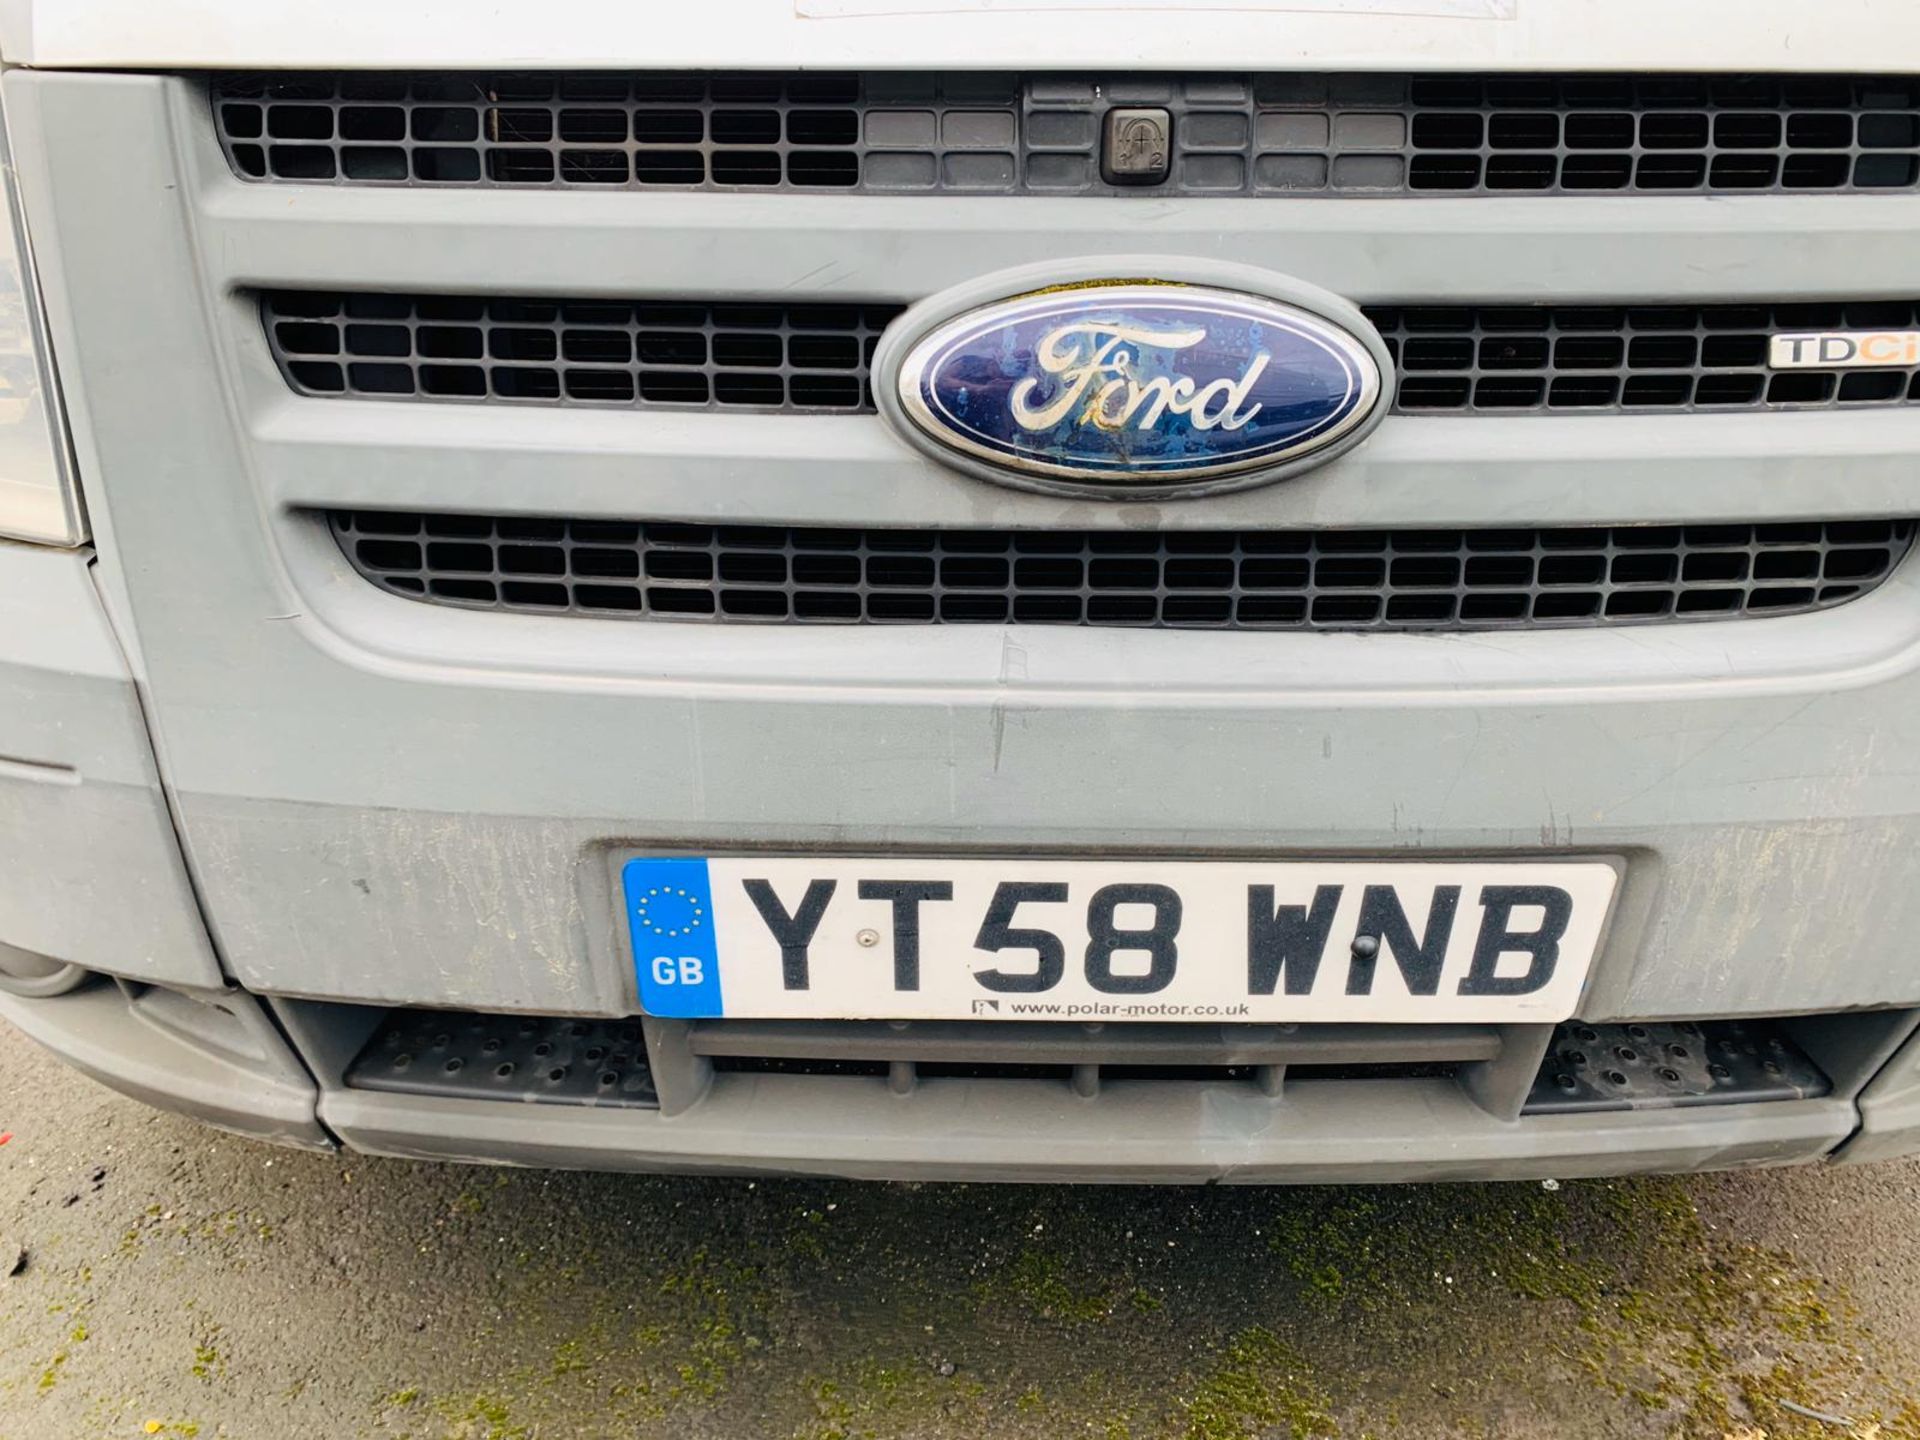 ENTRY DIRECT FROM LOCAL AUTHORITY Ford Transit Van - Image 18 of 24